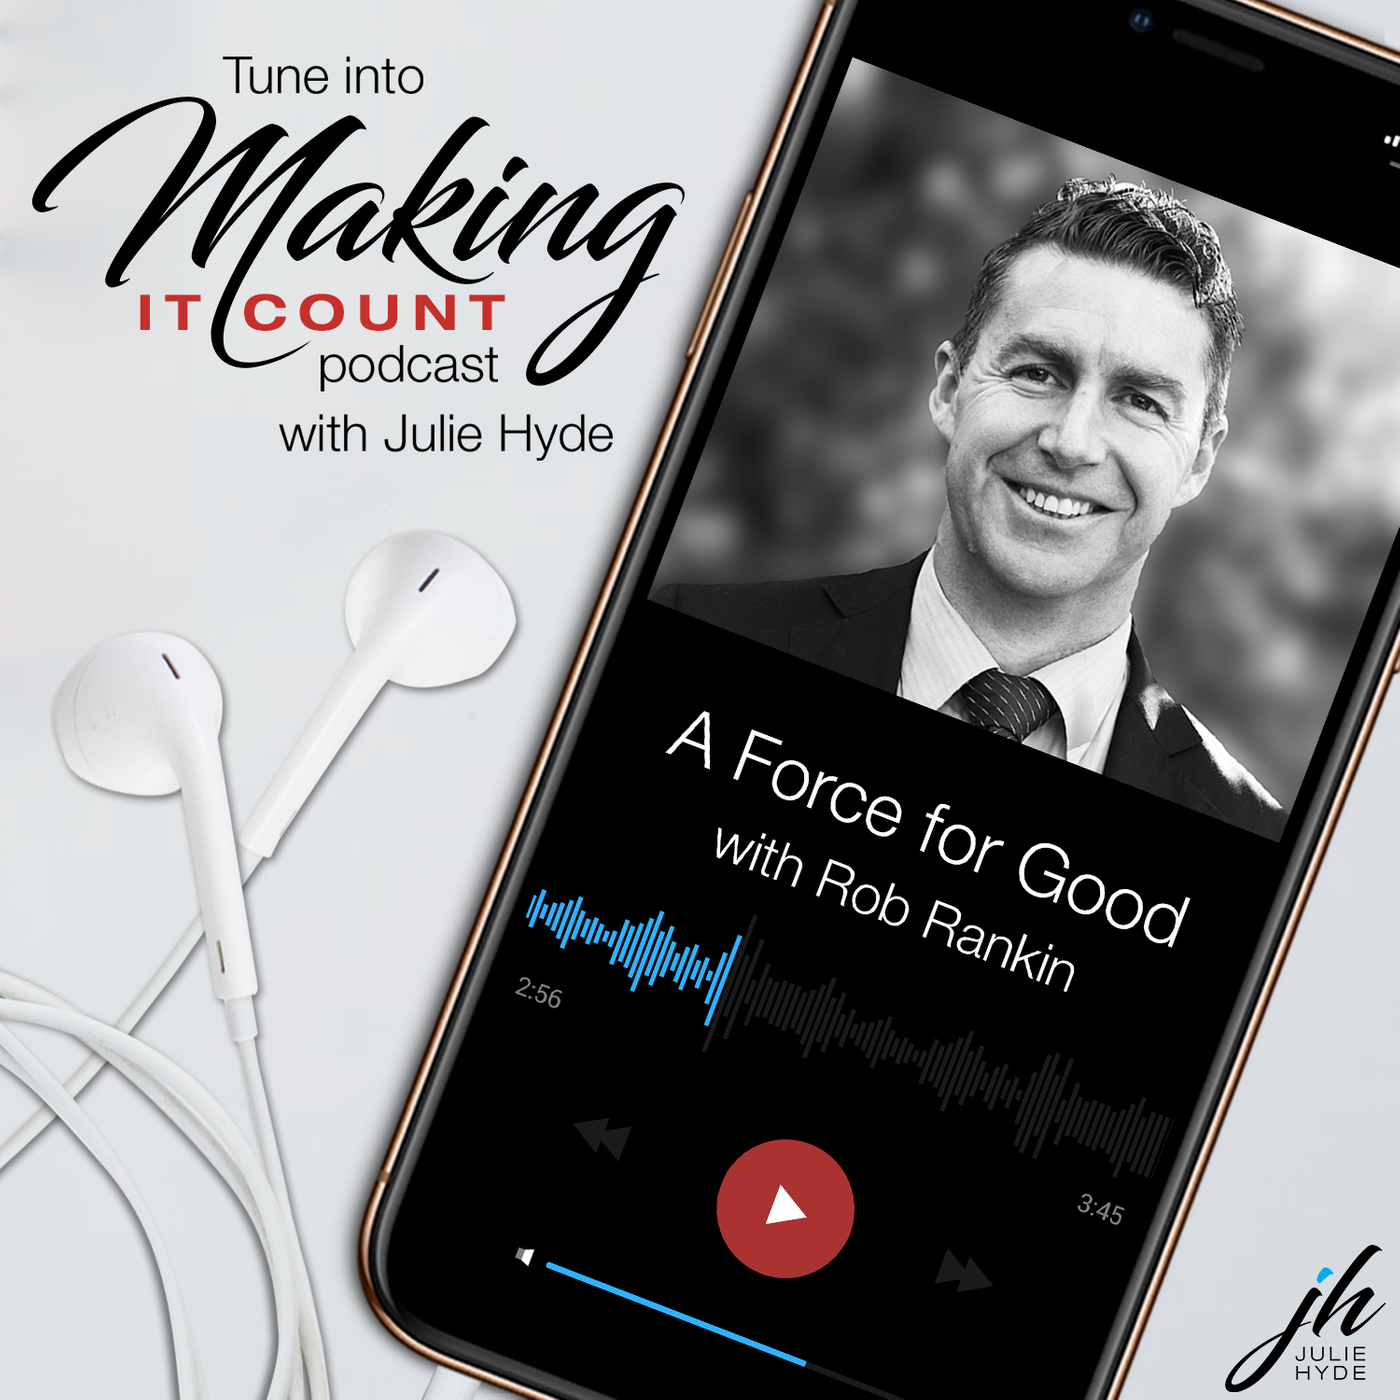 rob-rankin-force-for-good-julie-hyde-making-it-count-busy-leadership-leader-leaders-keynote-mindset-speaker-mentor-business-empower-lead-empowering-podcast-great-intentional-authentic-mentor-coach-role-model-top-best-inspire-engage-practical-insightful-boost-performance-tips-how-to-strategy-powerful-change-mindset-thrive-results-corporate-future-smart-program-mentorship-career-next-level-step-reconnect-control-proactive-agile-adaptable-one-on-one-woman-lady-boss-female-sydney-australia-speaker-host-guide-guidance-business-ceo-management